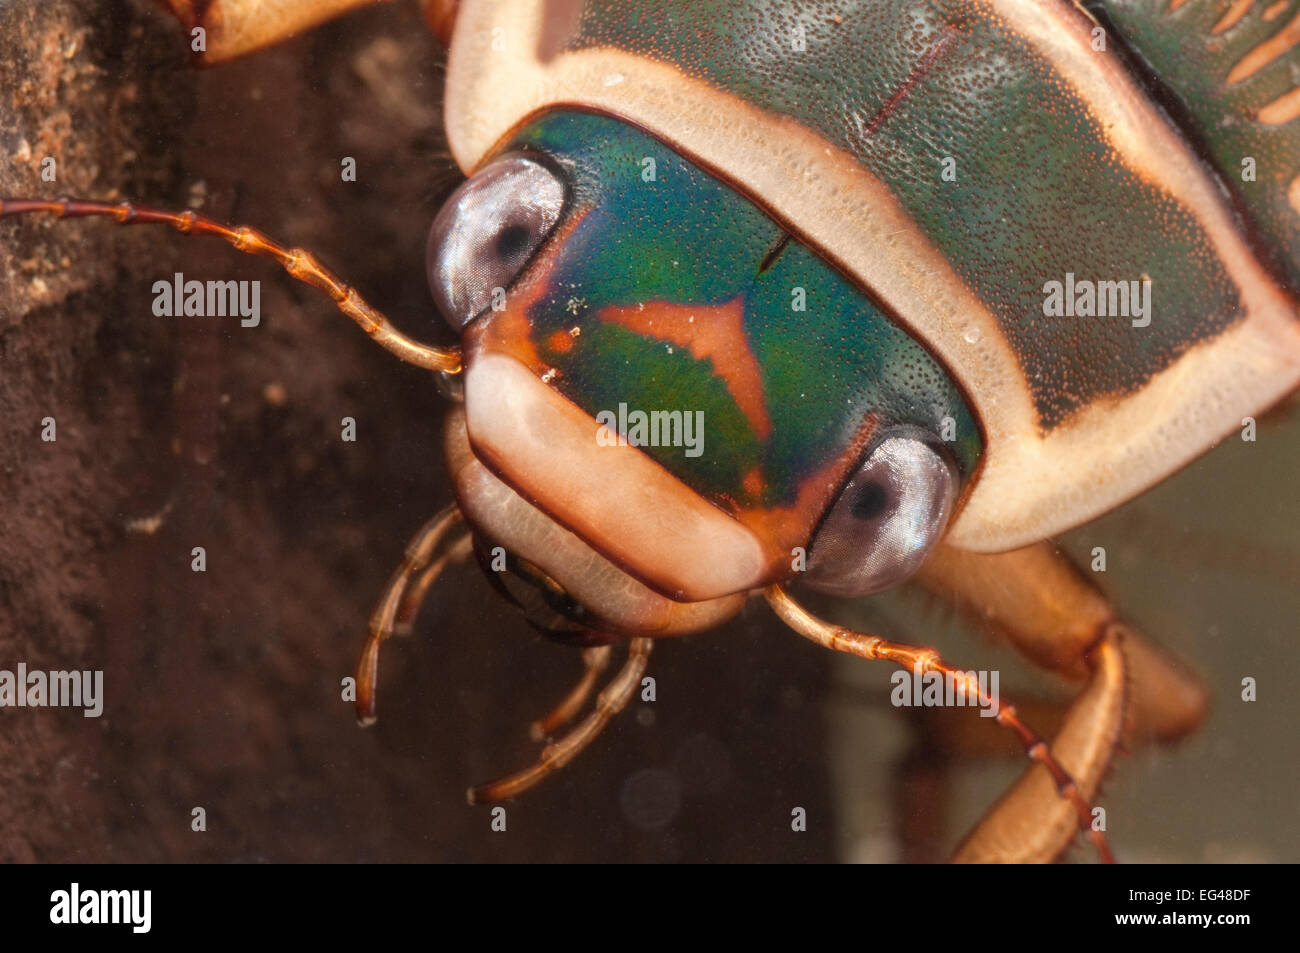 Great diving beetle (Dytiscus marginalis) portrait Europe September controlled conditions Stock Photo